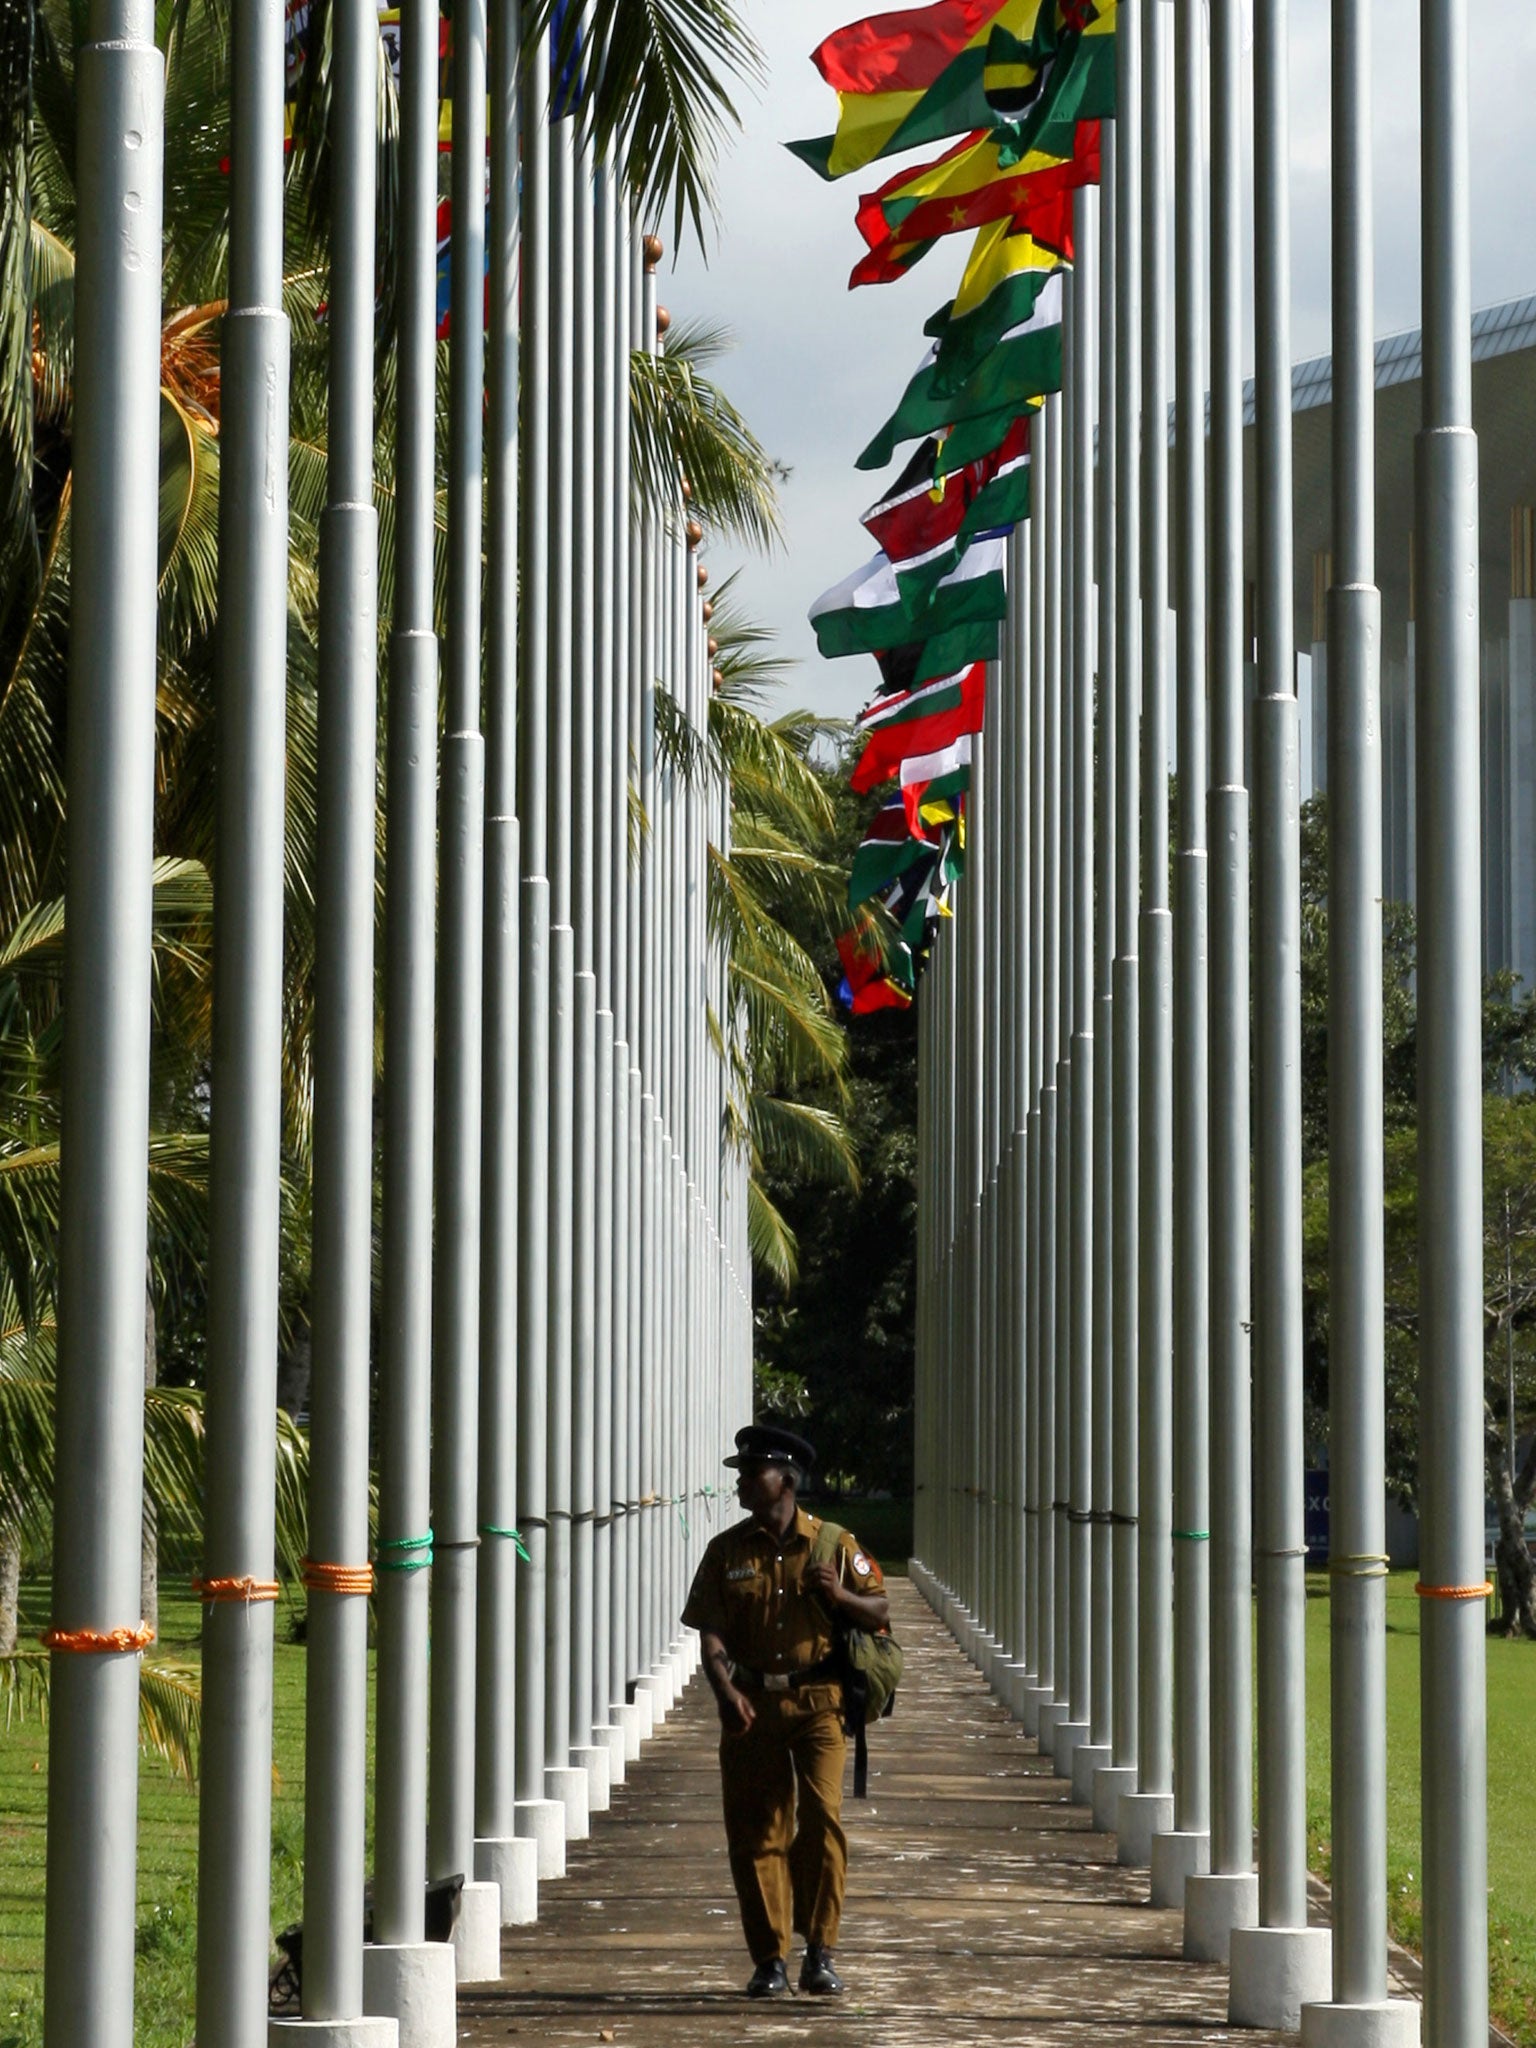 National flags of the Commonwealth countries outside the Bandaranaike Memorial International Conference Hall in Colombo, where the heads of government will meet at the summit